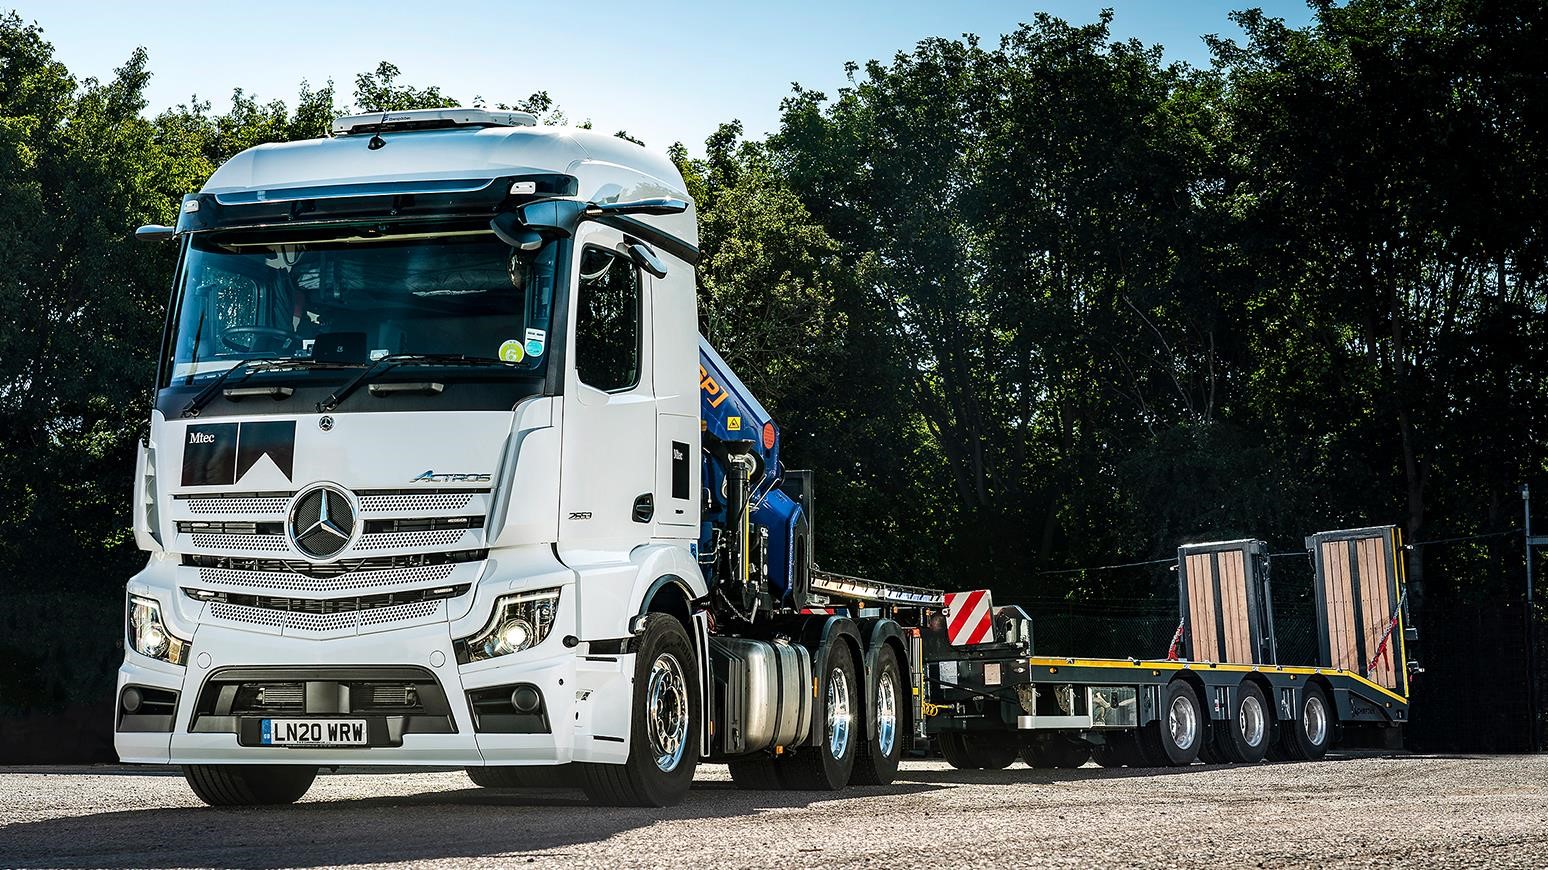 Art Transport Specialist Mtec Adds First New-Generation Mercedes-Benz Actros 2653 With MirrorCam System & Multimedia Cockpit